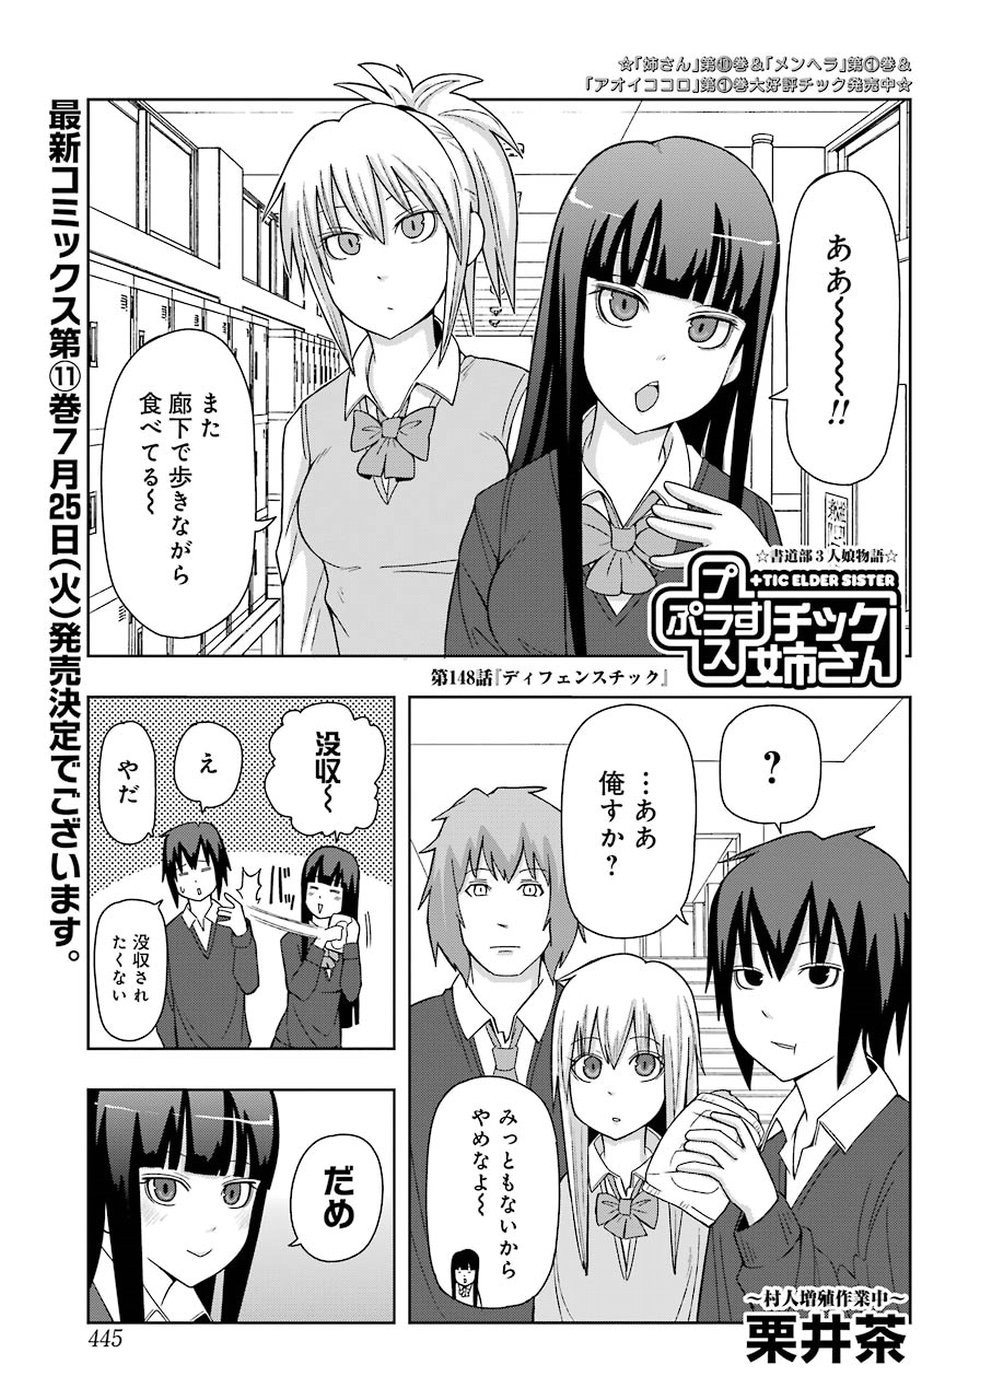 + Tic Nee-san - Chapter 148 - Page 1